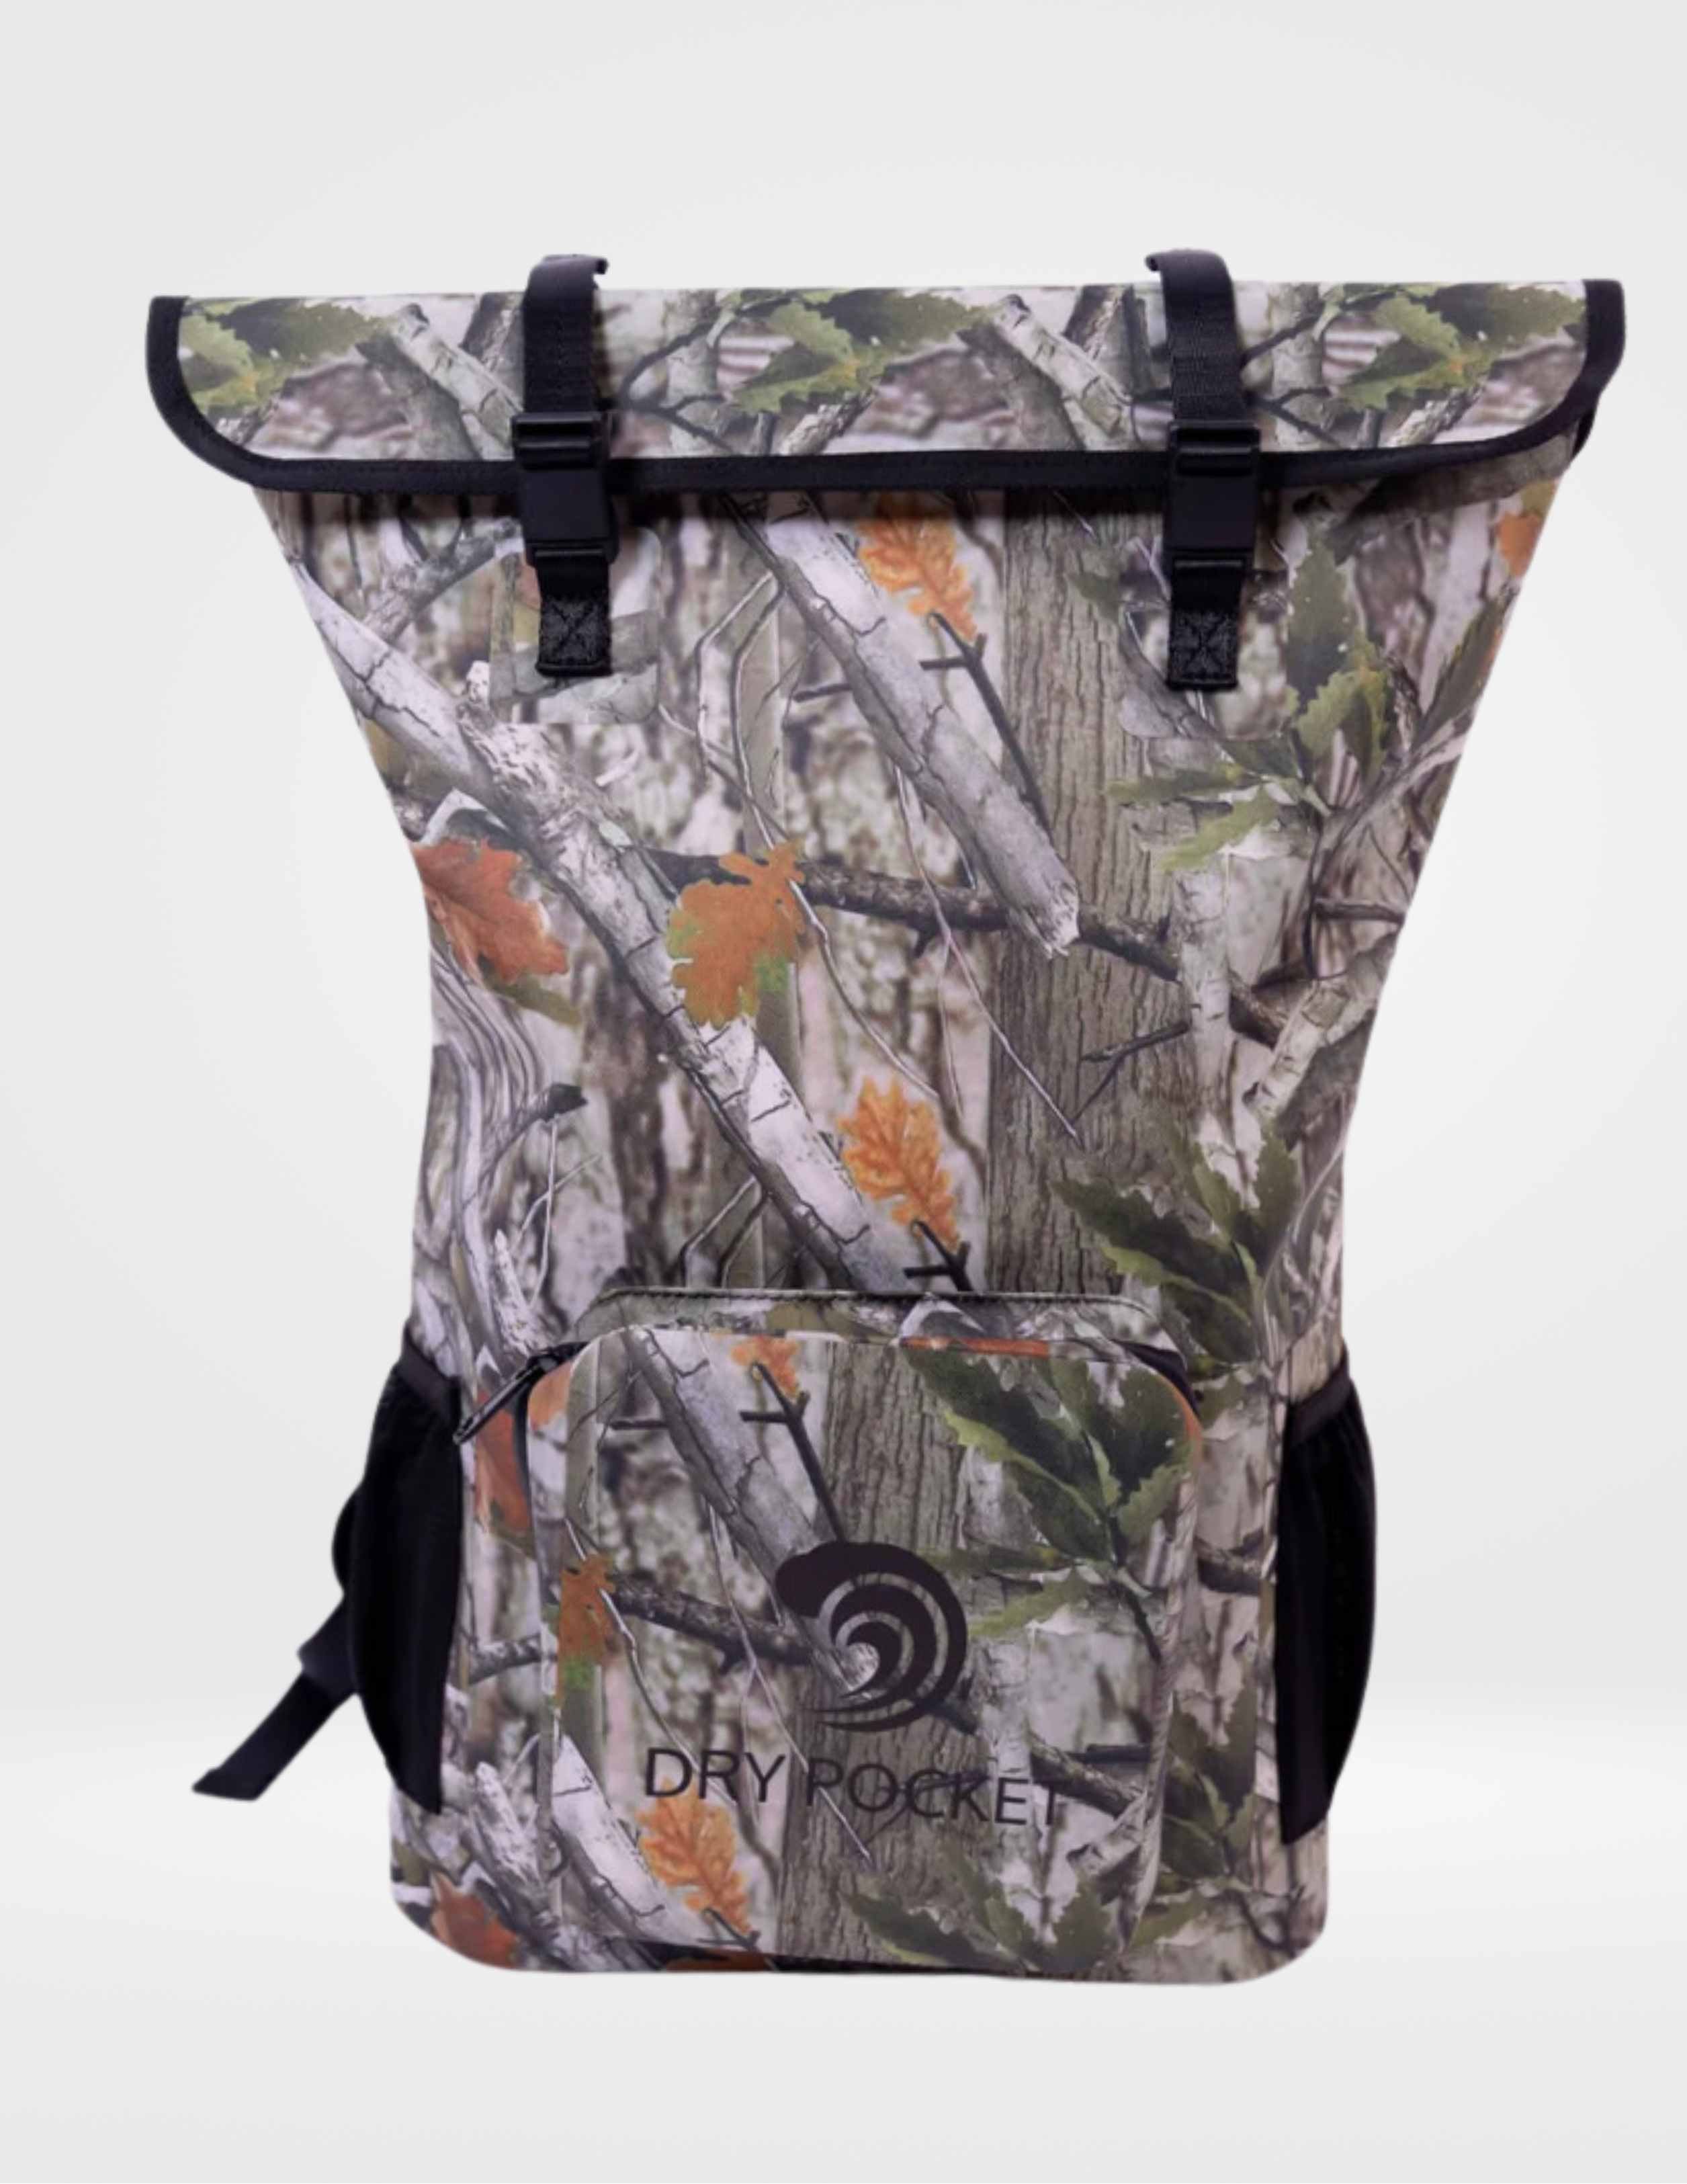 Dry Pocket Camouflage Auto Sealing Backpack Dry Bag Forest Camo, 25 L - Prsnl Coolrs Soft/Hard at Academy Sports